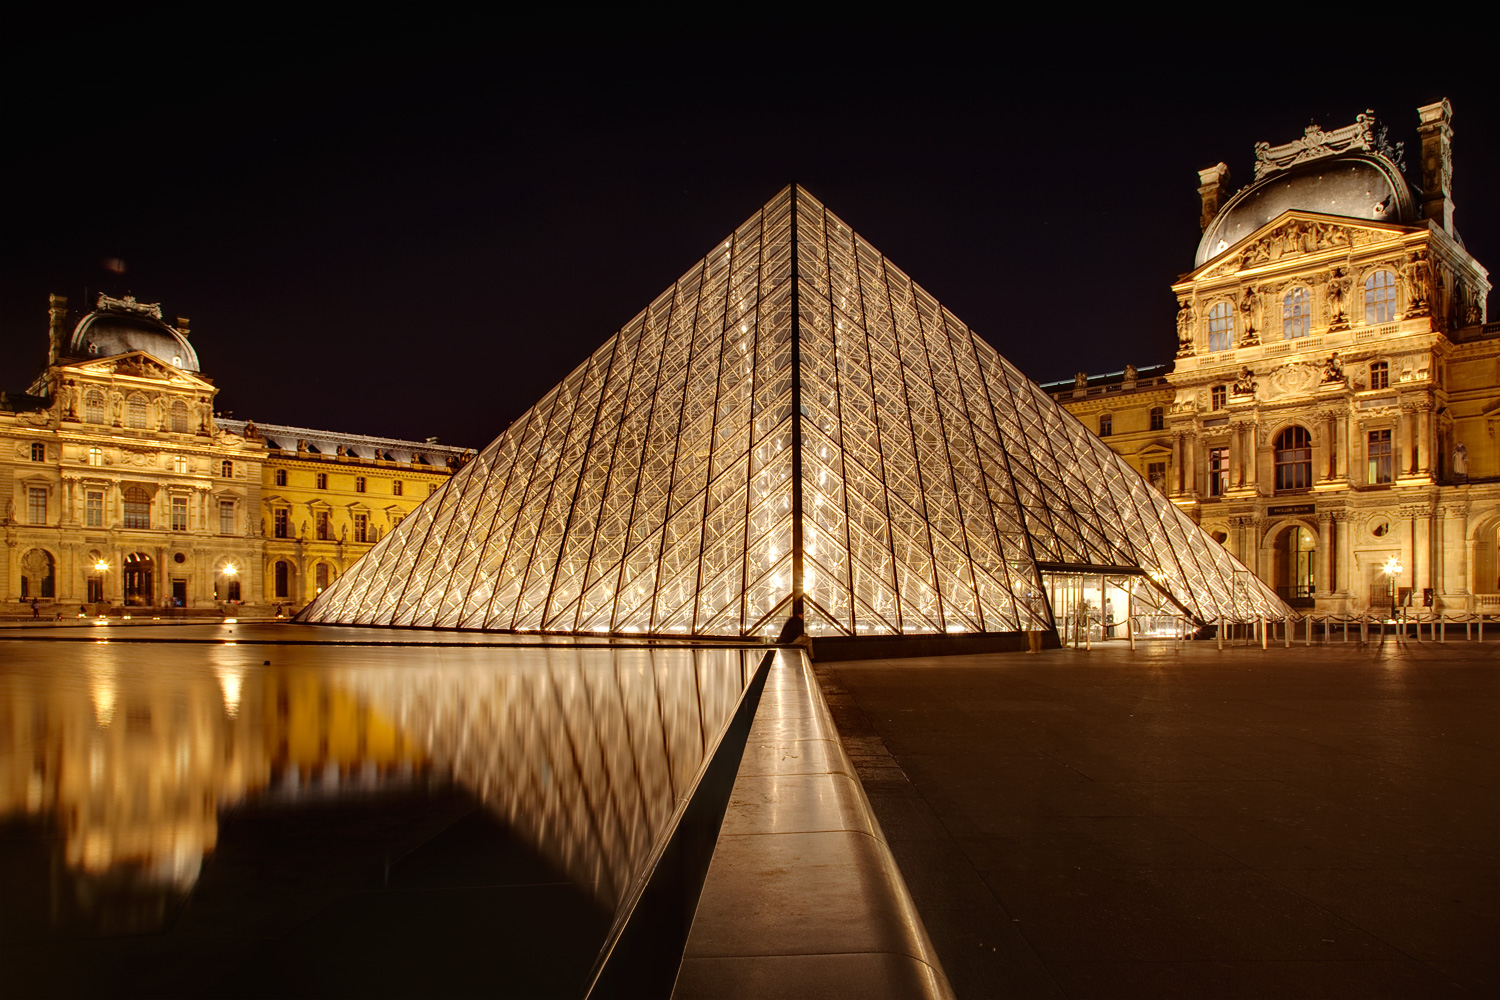 Amazing The Louvre Pictures & Backgrounds